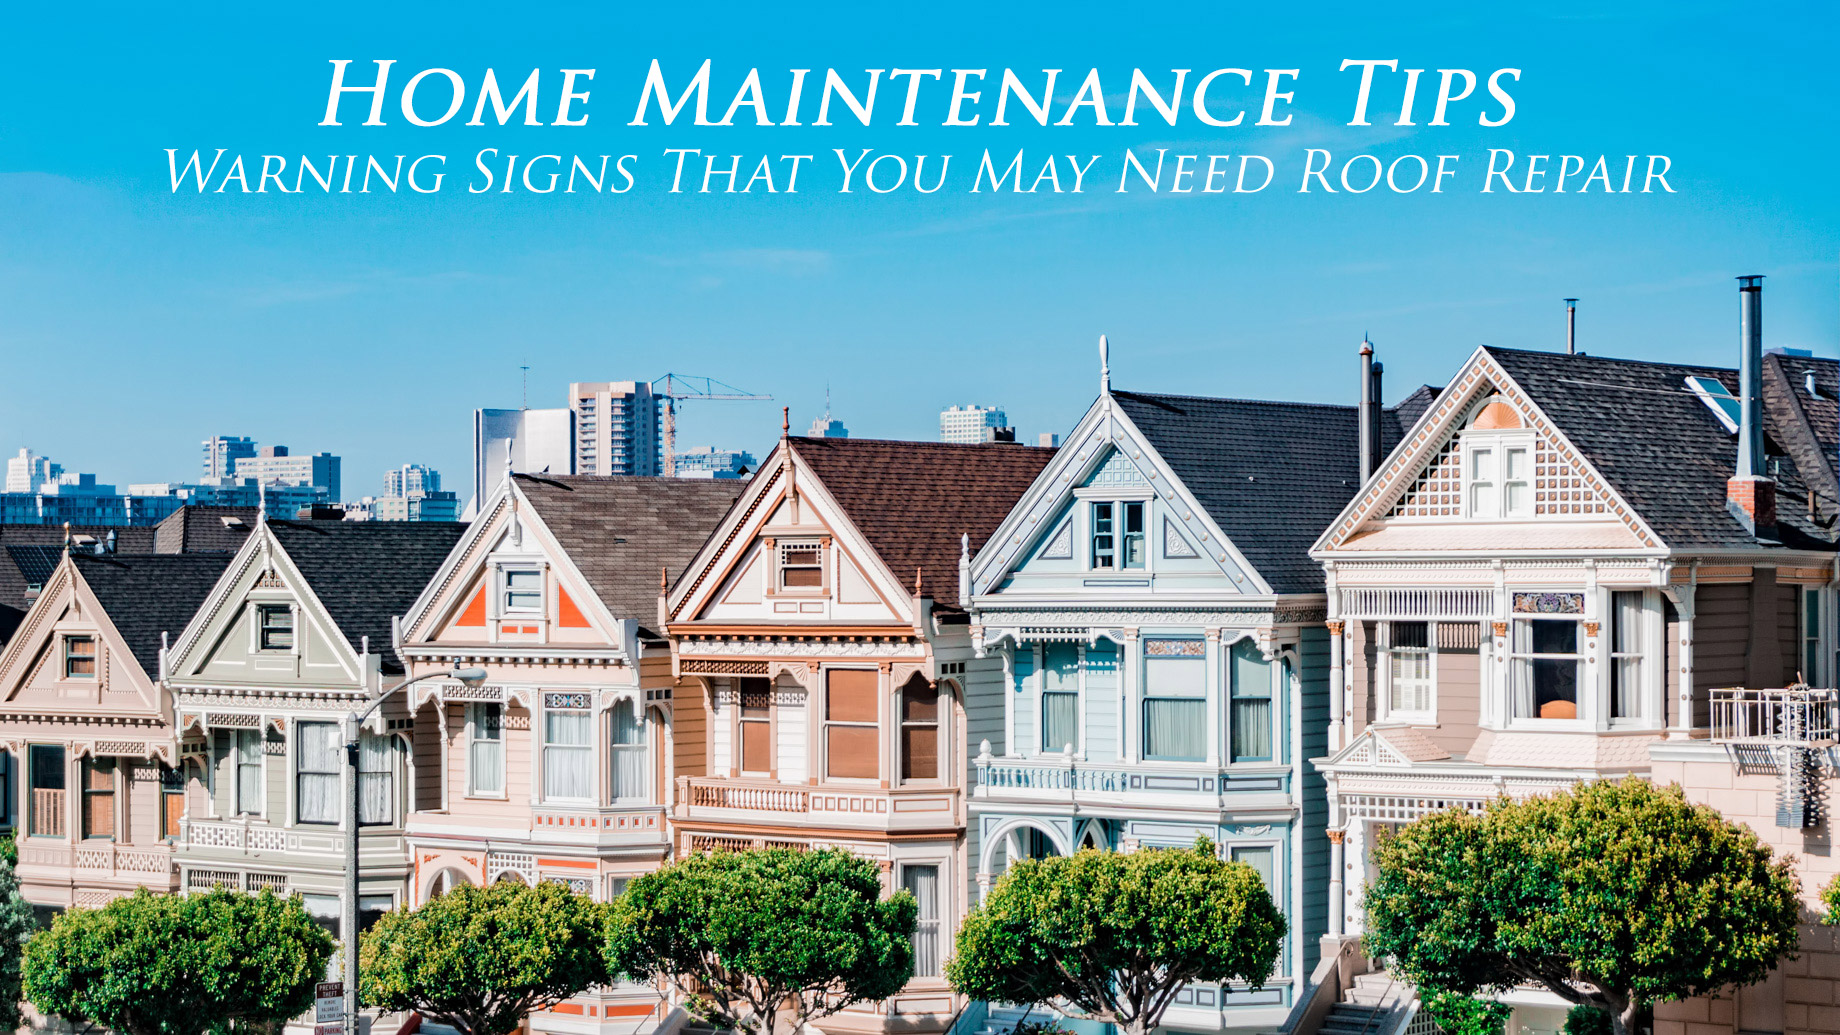 Home Maintenance Tips - Warning Signs That You May Need Roof Repair